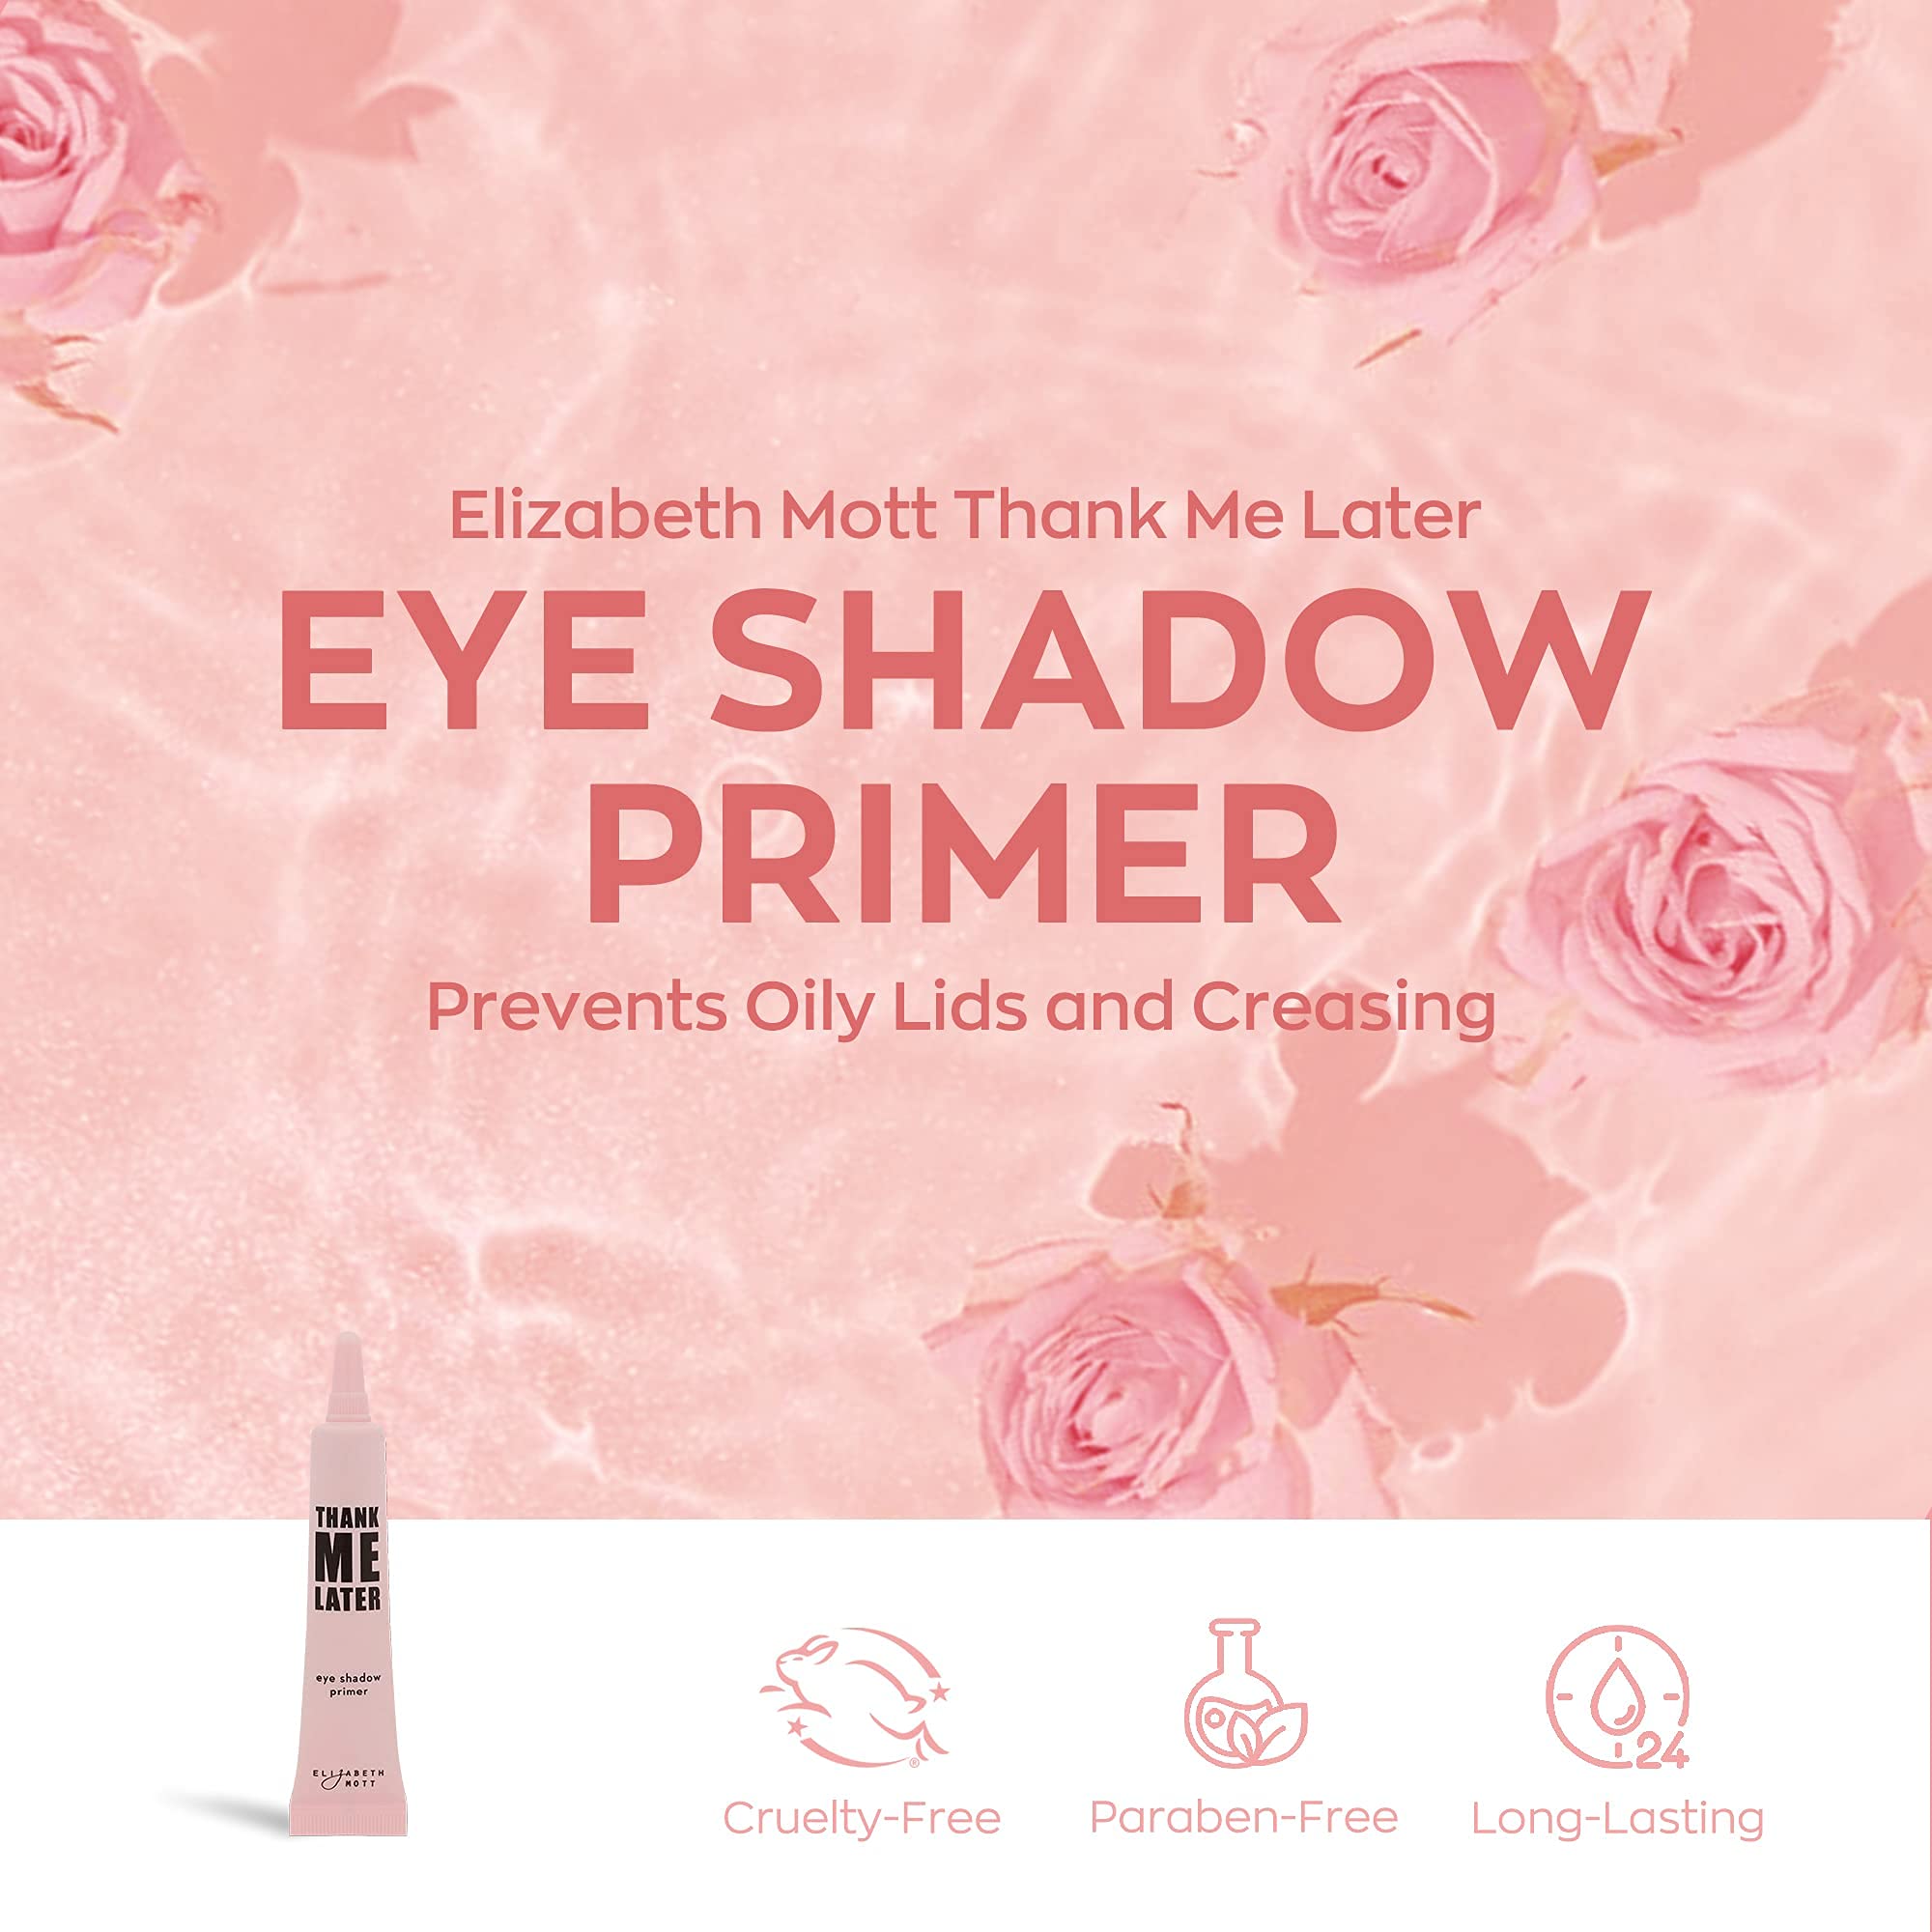 Elizabeth Mott Thank Me Later Eye Primer for Long-Lasting Makeup, Clear Mattifying Waterproof Eyeshadow Base to Control Oil, Prevent Creasing, and Shine 10g